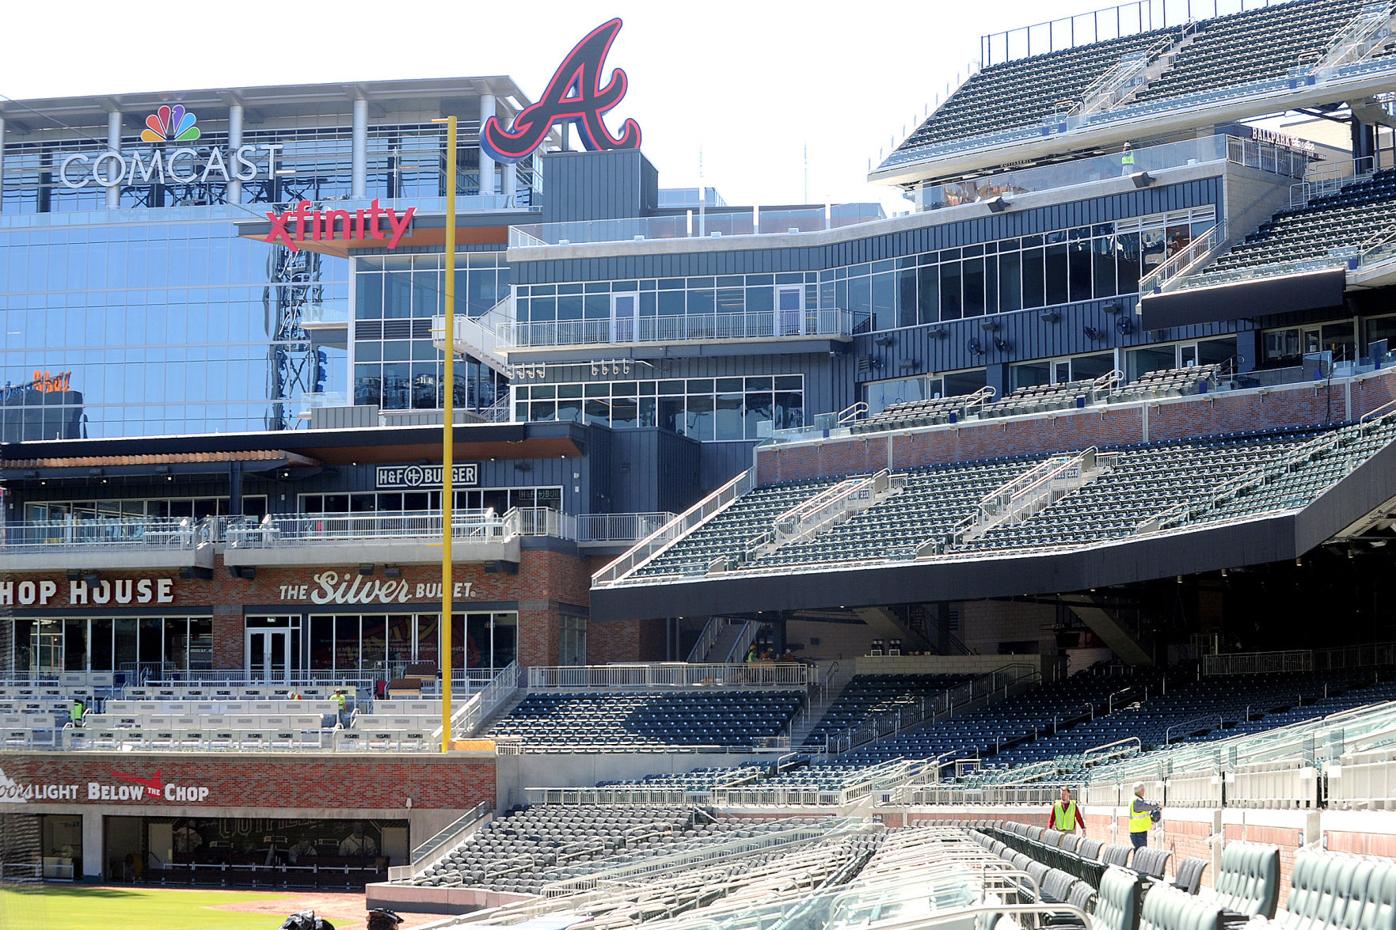 A look at SunTrust Park — the new home of the Atlanta Braves